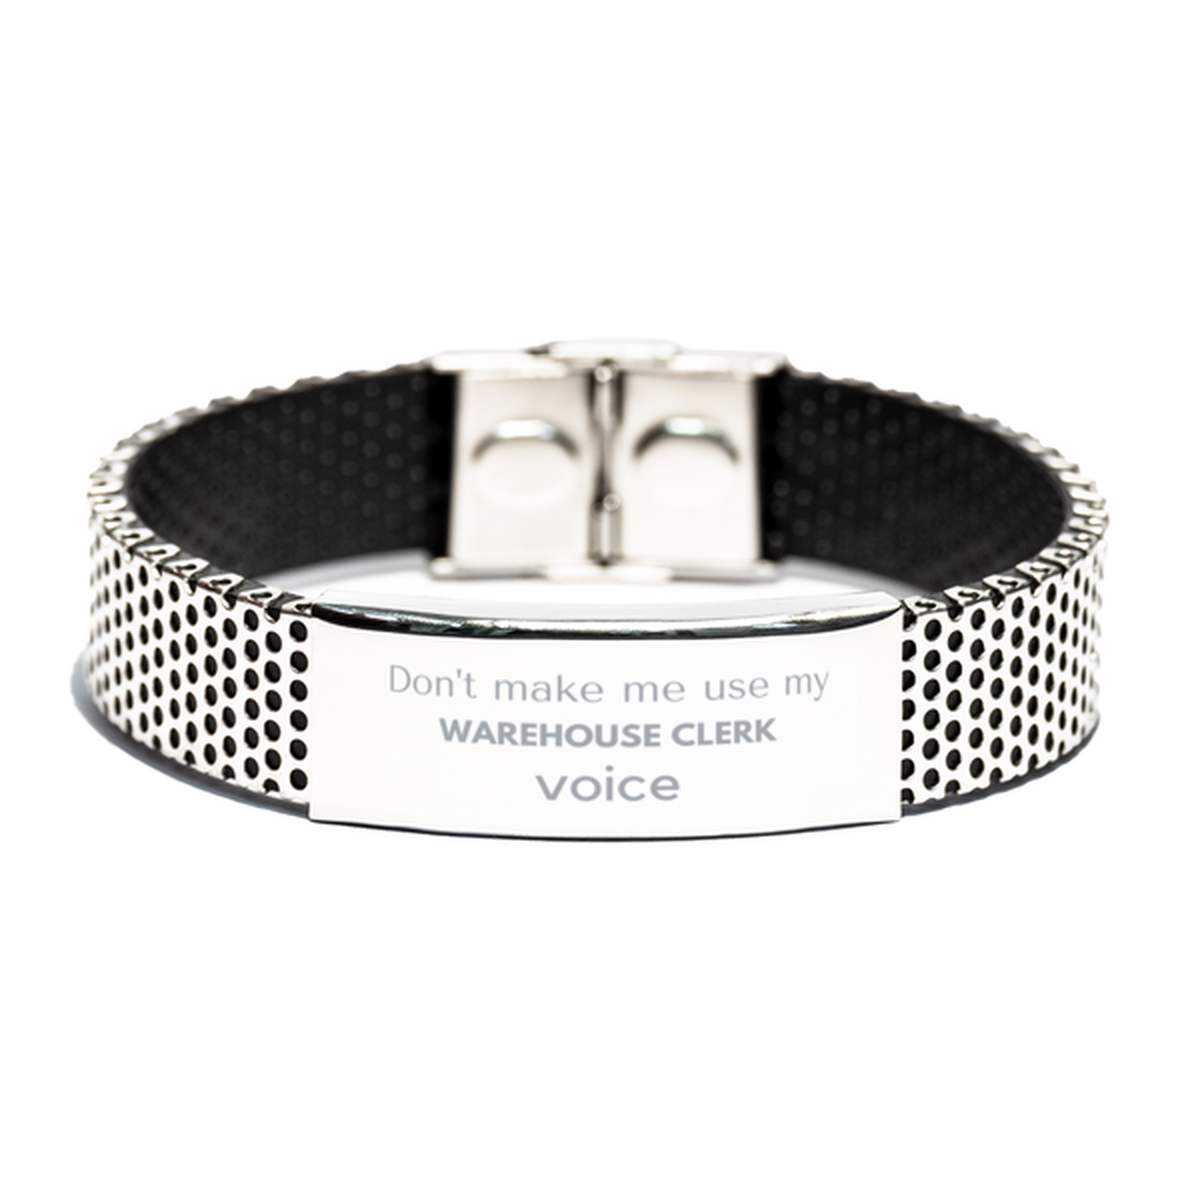 Don't make me use my Warehouse Clerk voice, Sarcasm Warehouse Clerk Gifts, Christmas Warehouse Clerk Stainless Steel Bracelet Birthday Unique Gifts For Warehouse Clerk Coworkers, Men, Women, Colleague, Friends